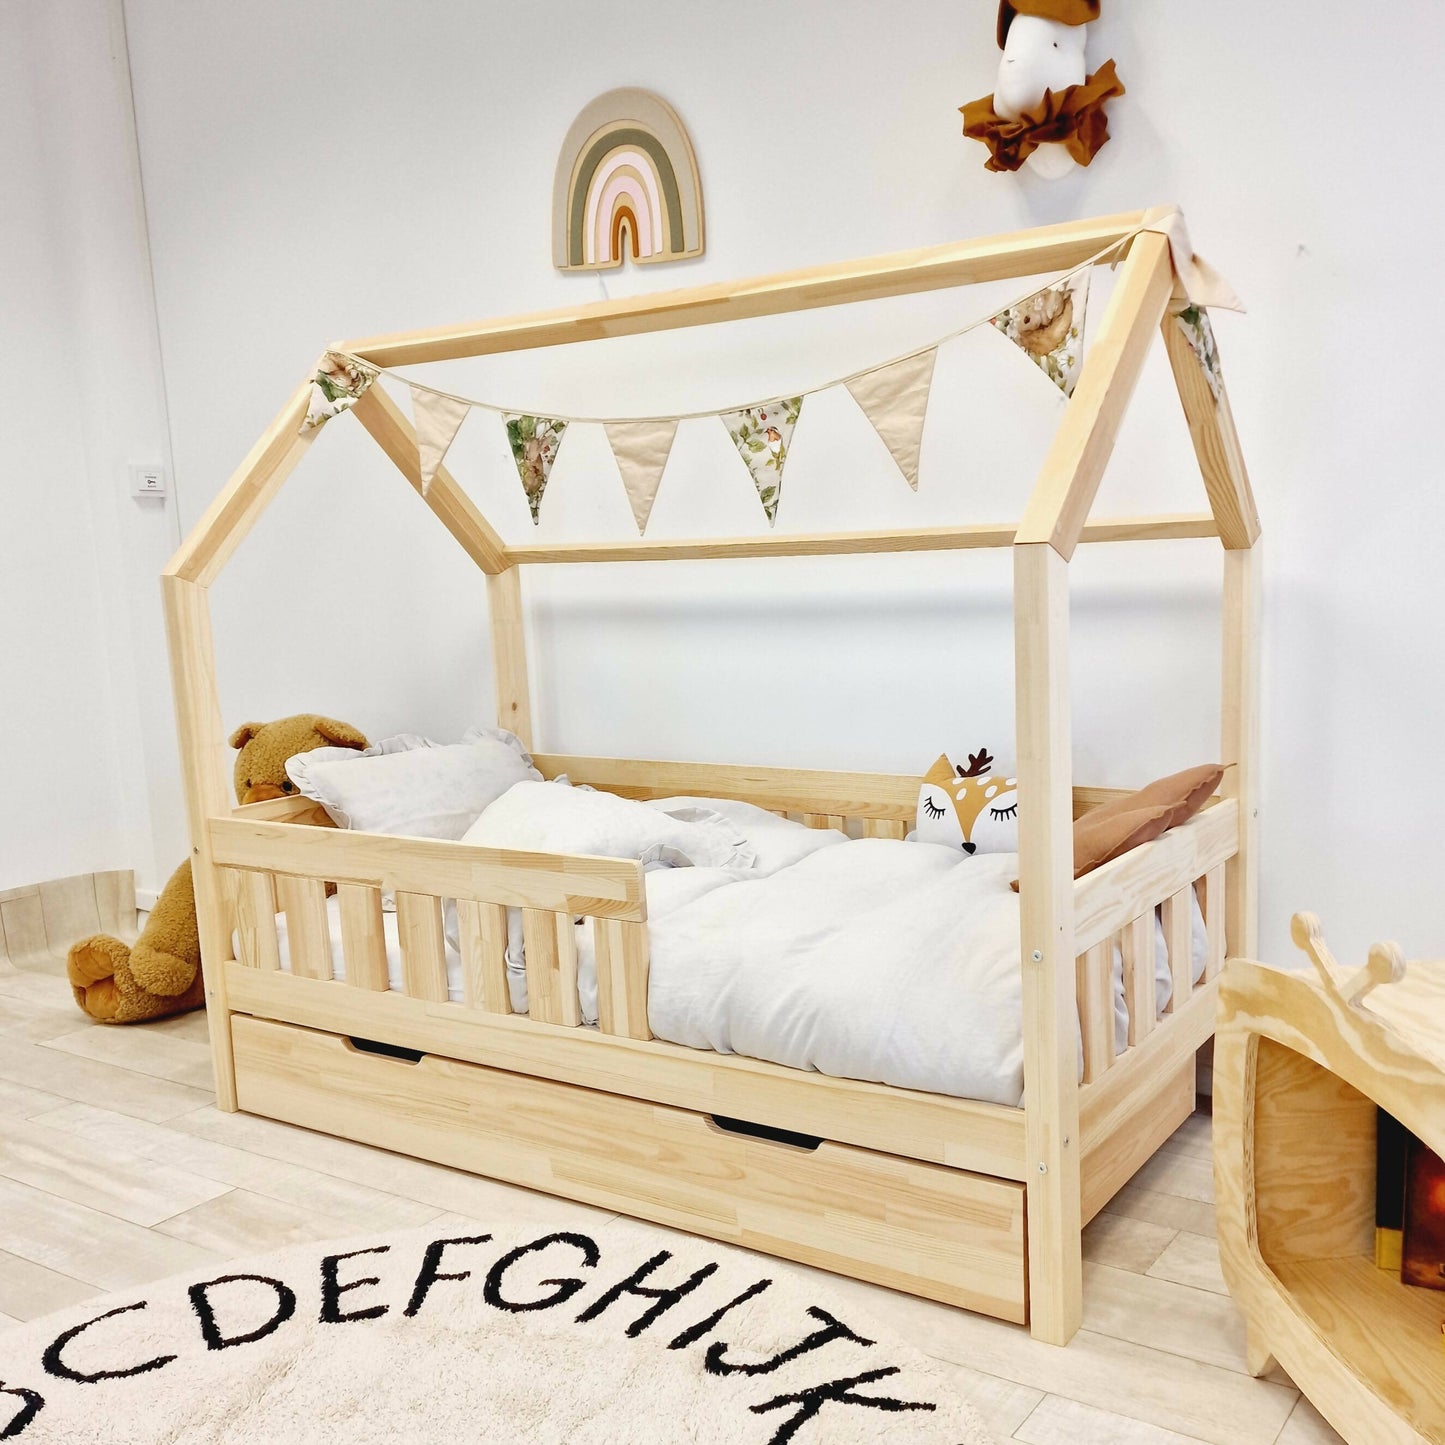 Children's cabin bed with bar barriers and drawer